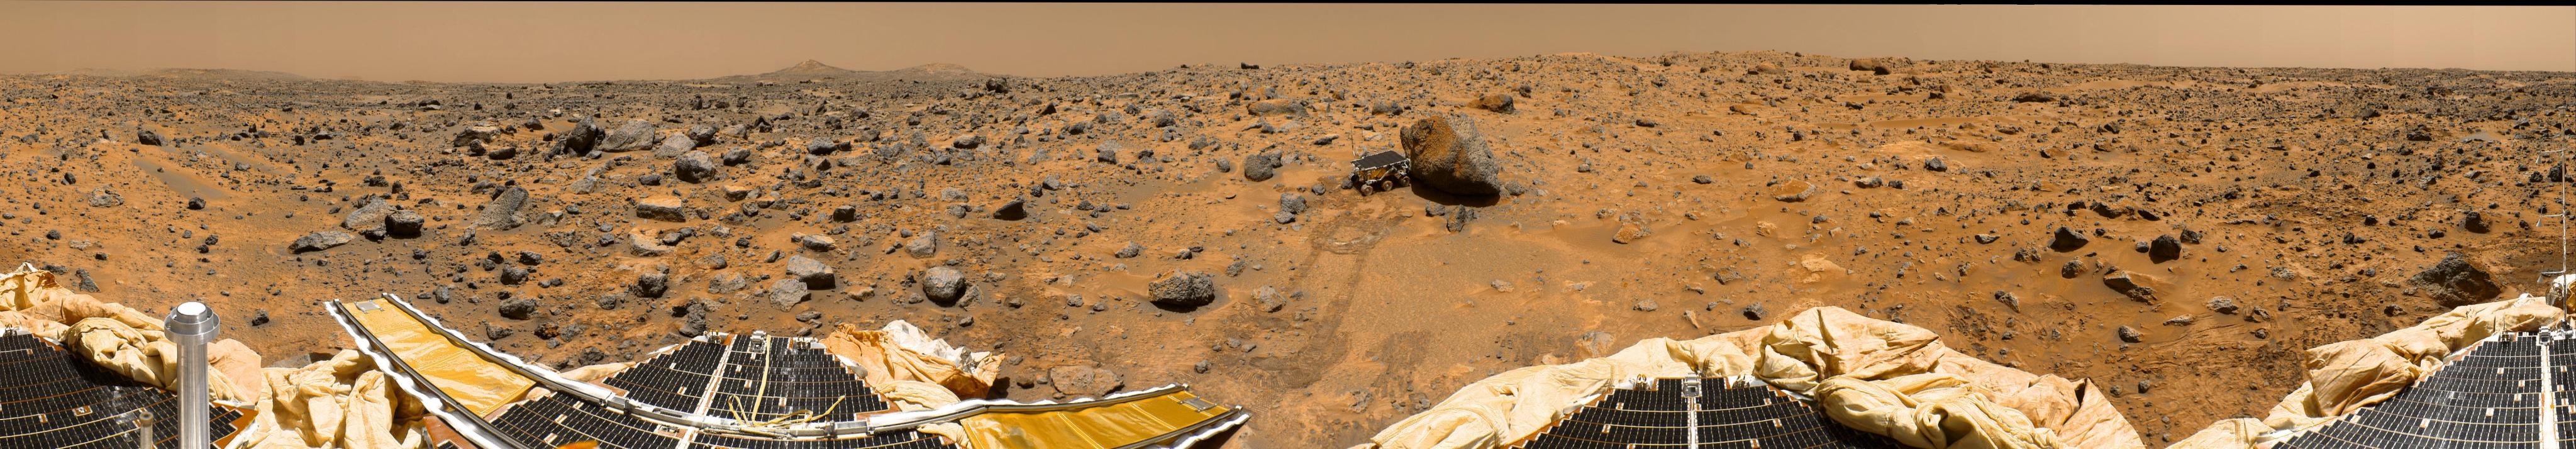 A rover the size of a child's wagon explores a large rock on the surface of Mars. The Pathfinder science station and rover tire tracks are visible in the foreground.